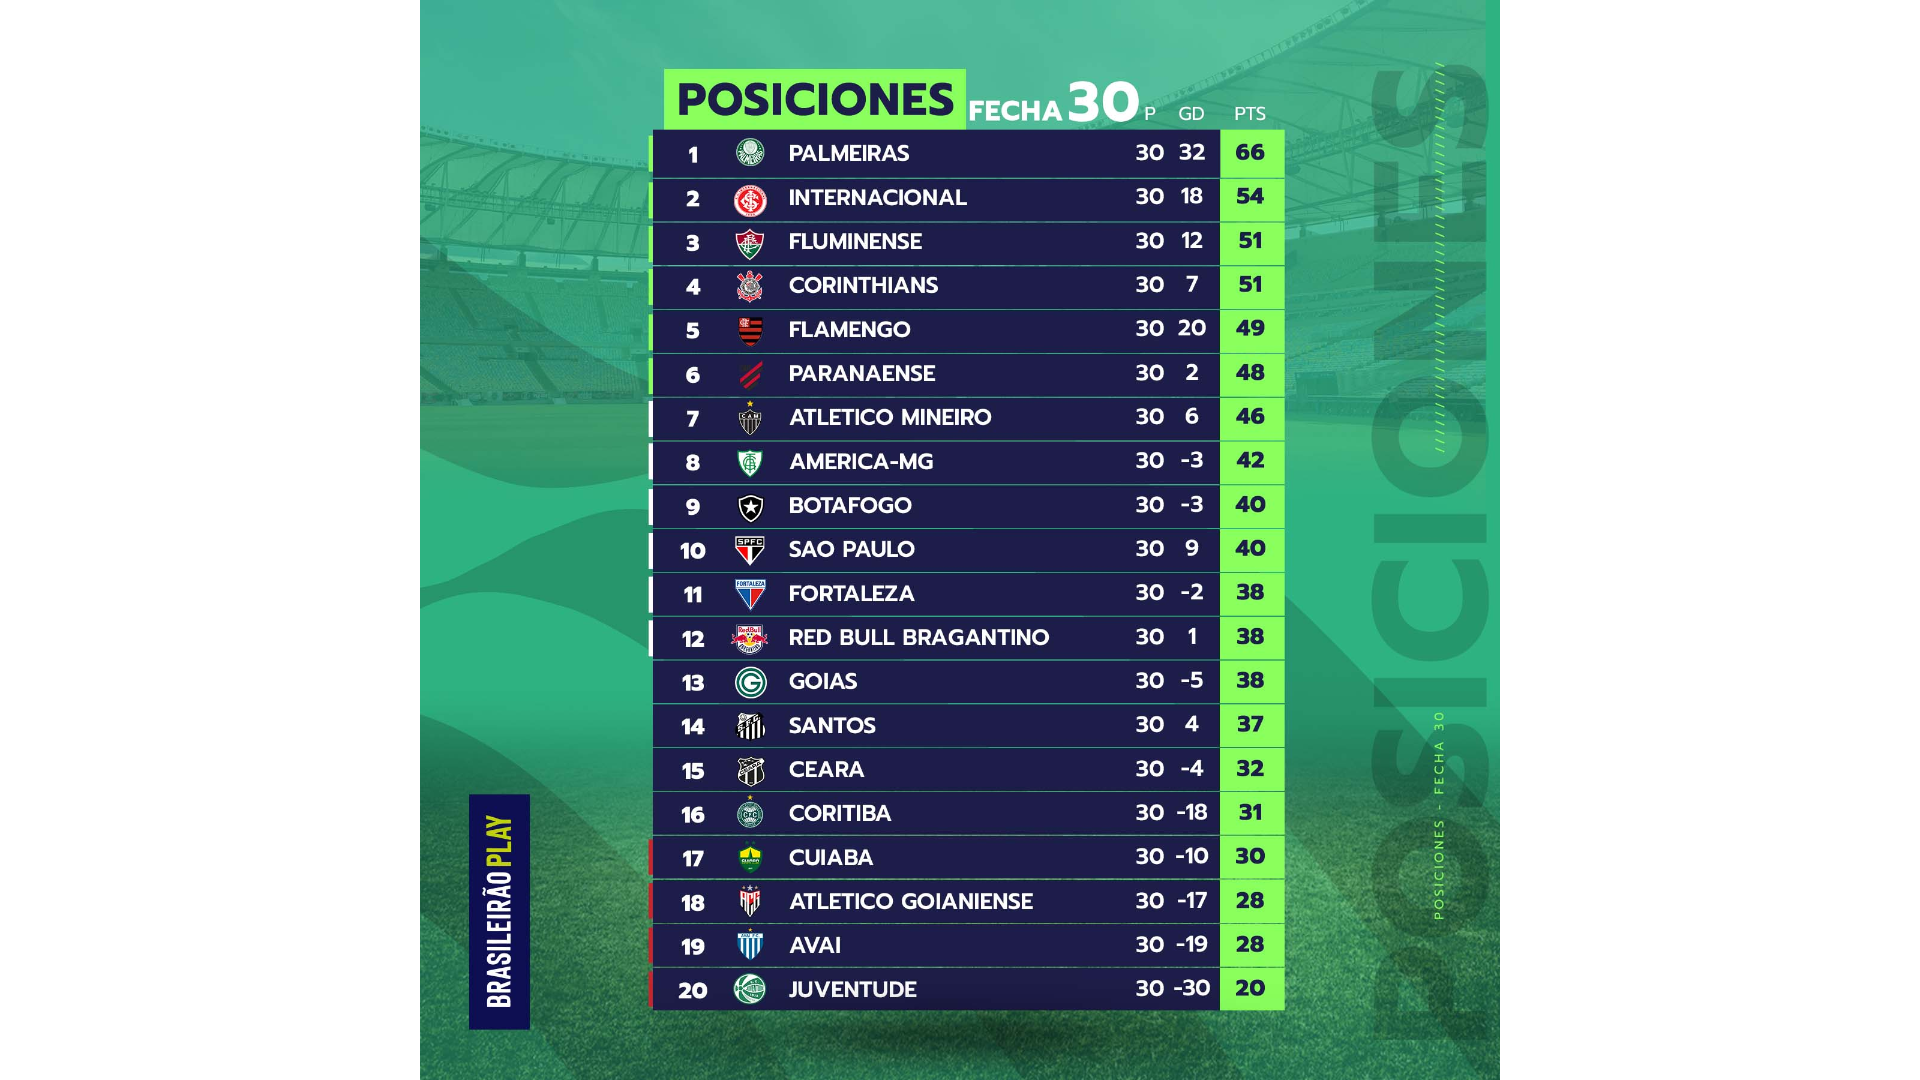 Avaí FC is in 19th place and is in the relegation zone in the Brazilian tournament.  (Brazilian Play)